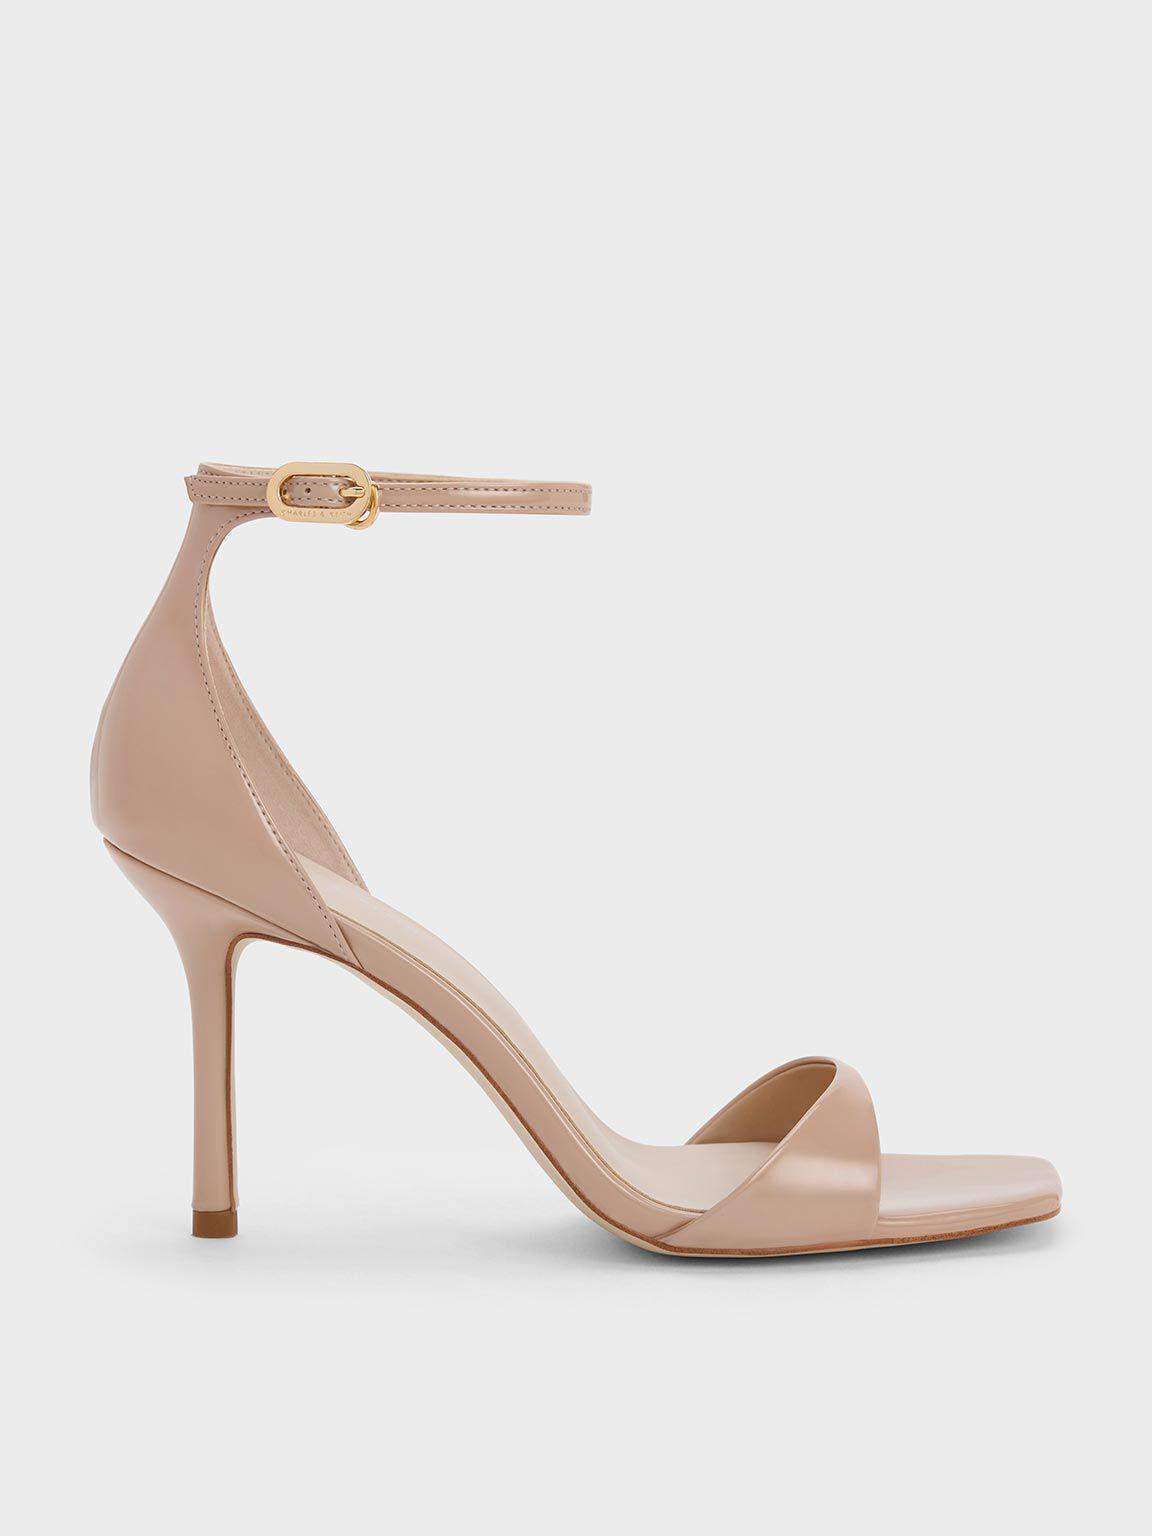 Nude Patent Ankle Strap Heeled Sandals - CHARLES & KEITH US